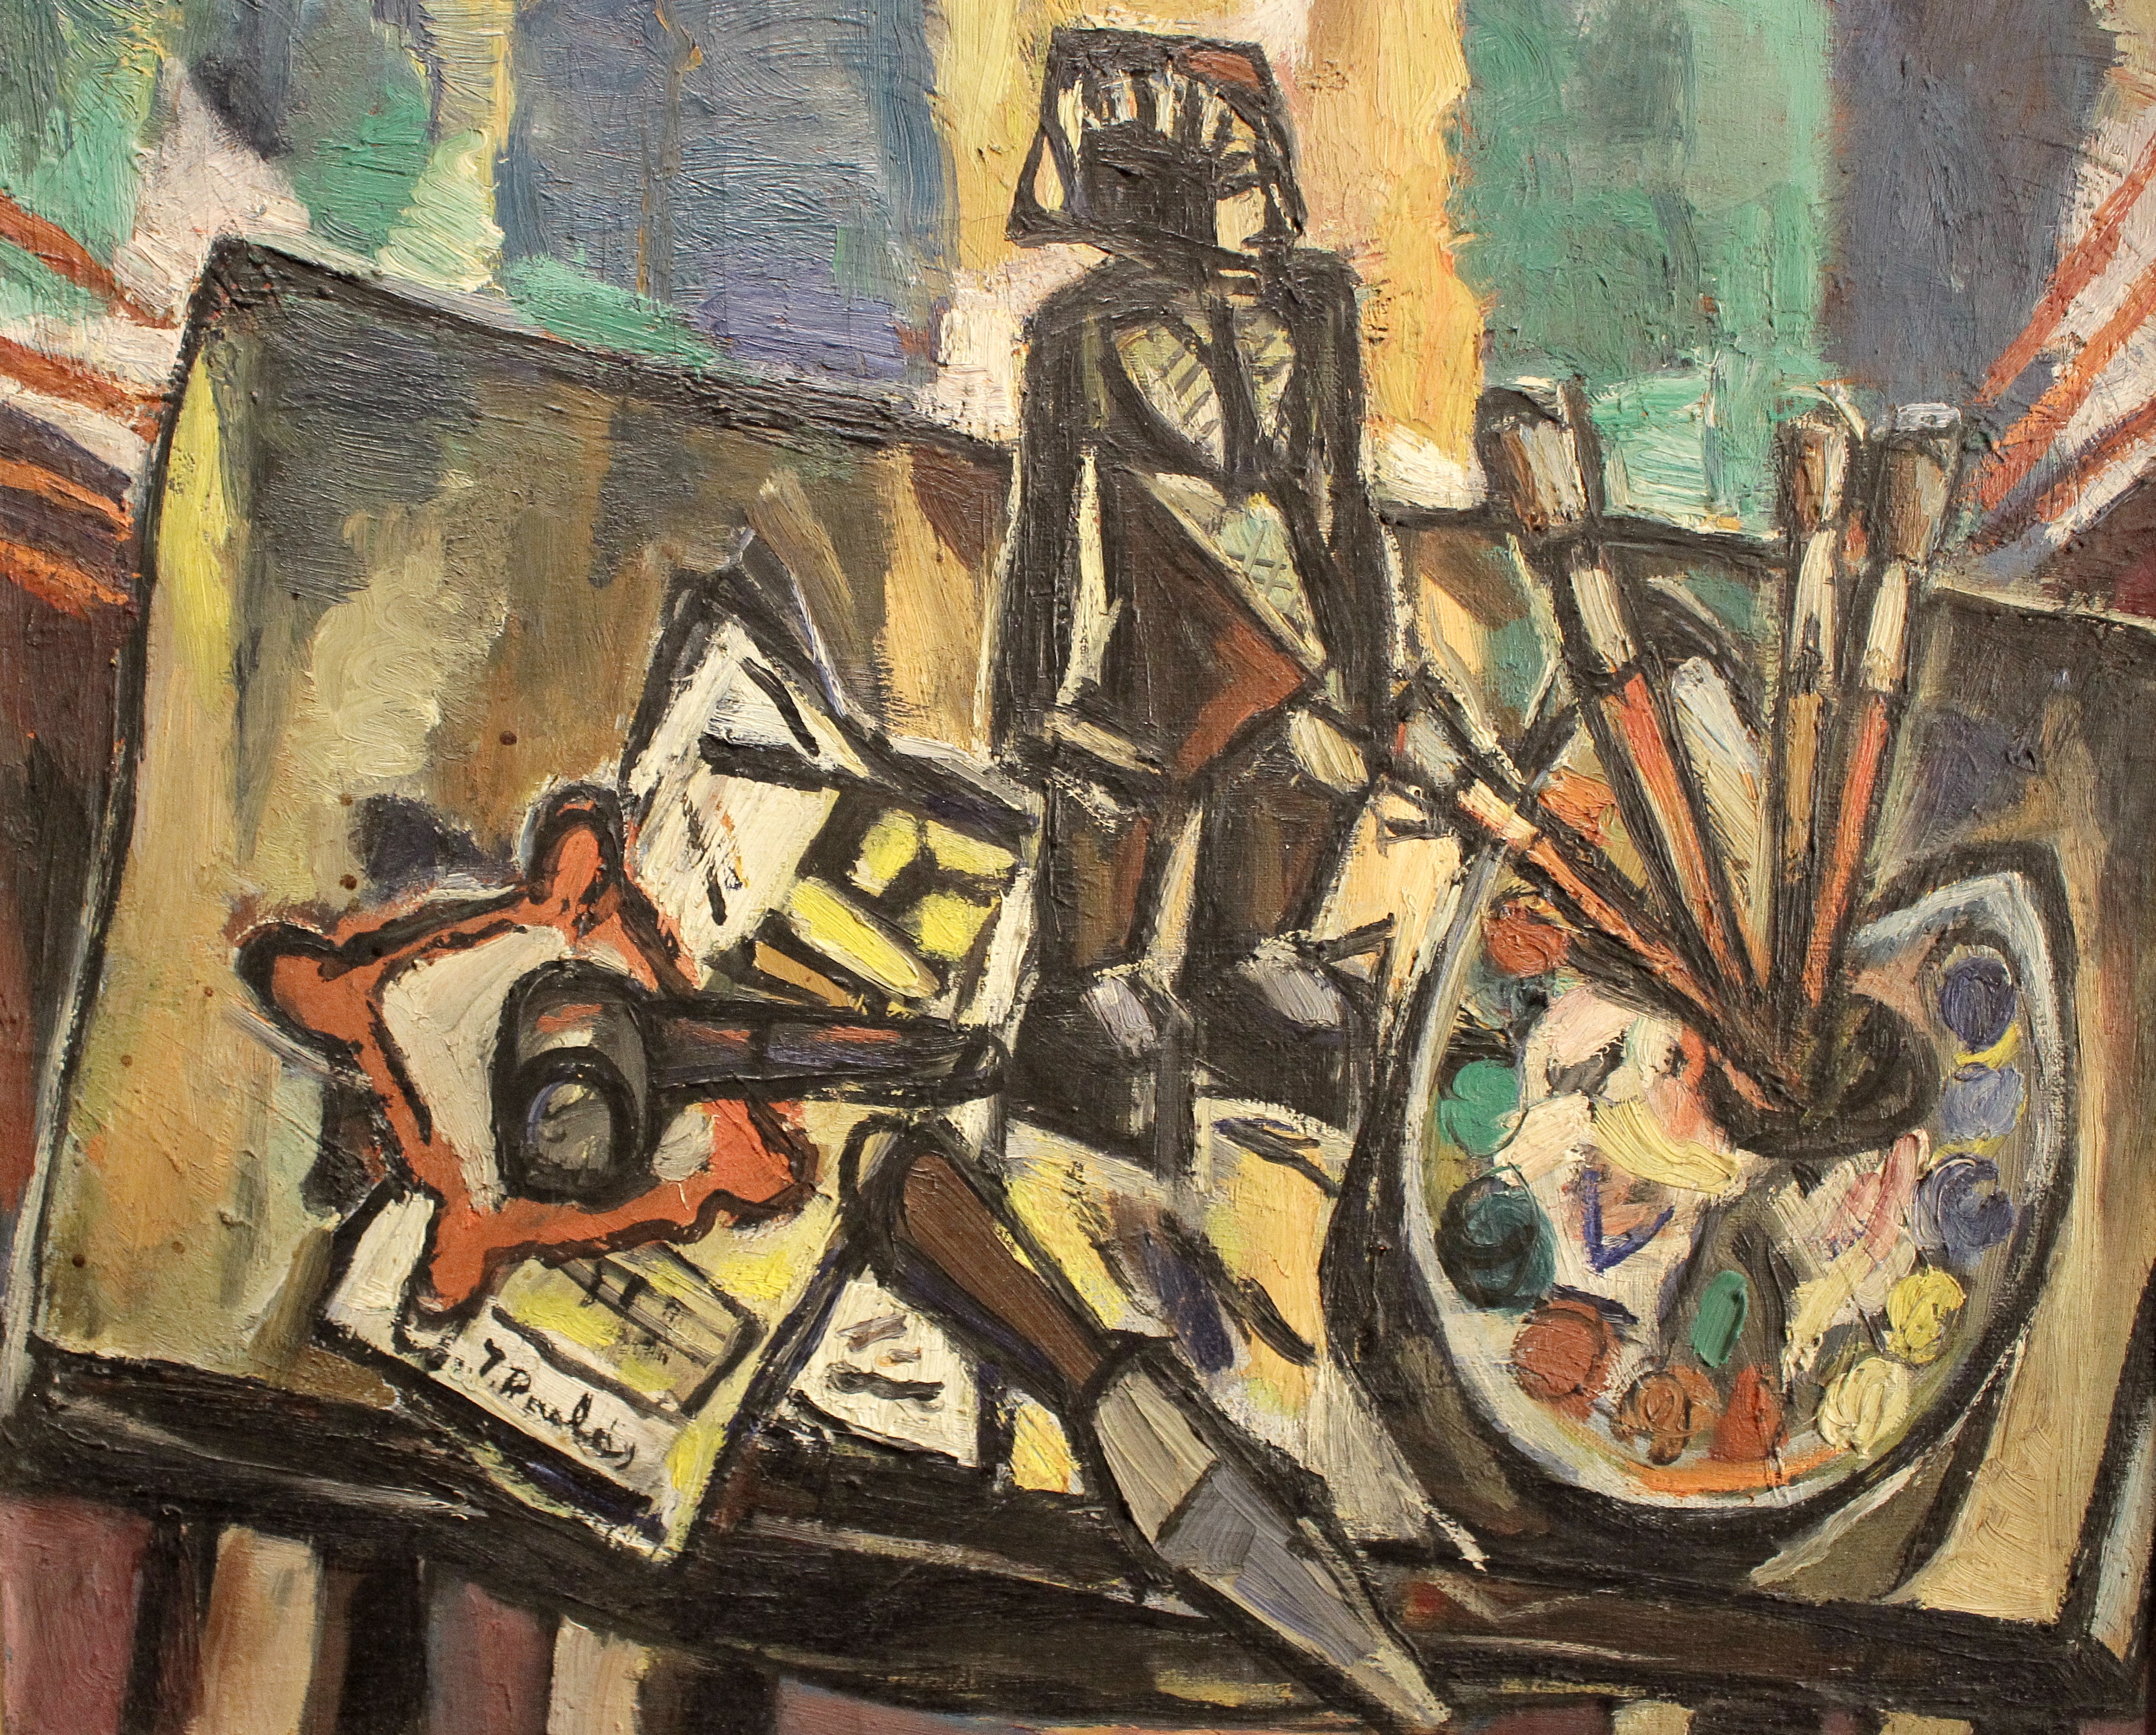 Isaac Pailes, French Ukrnian, 1895-1978, Abstract Still Life